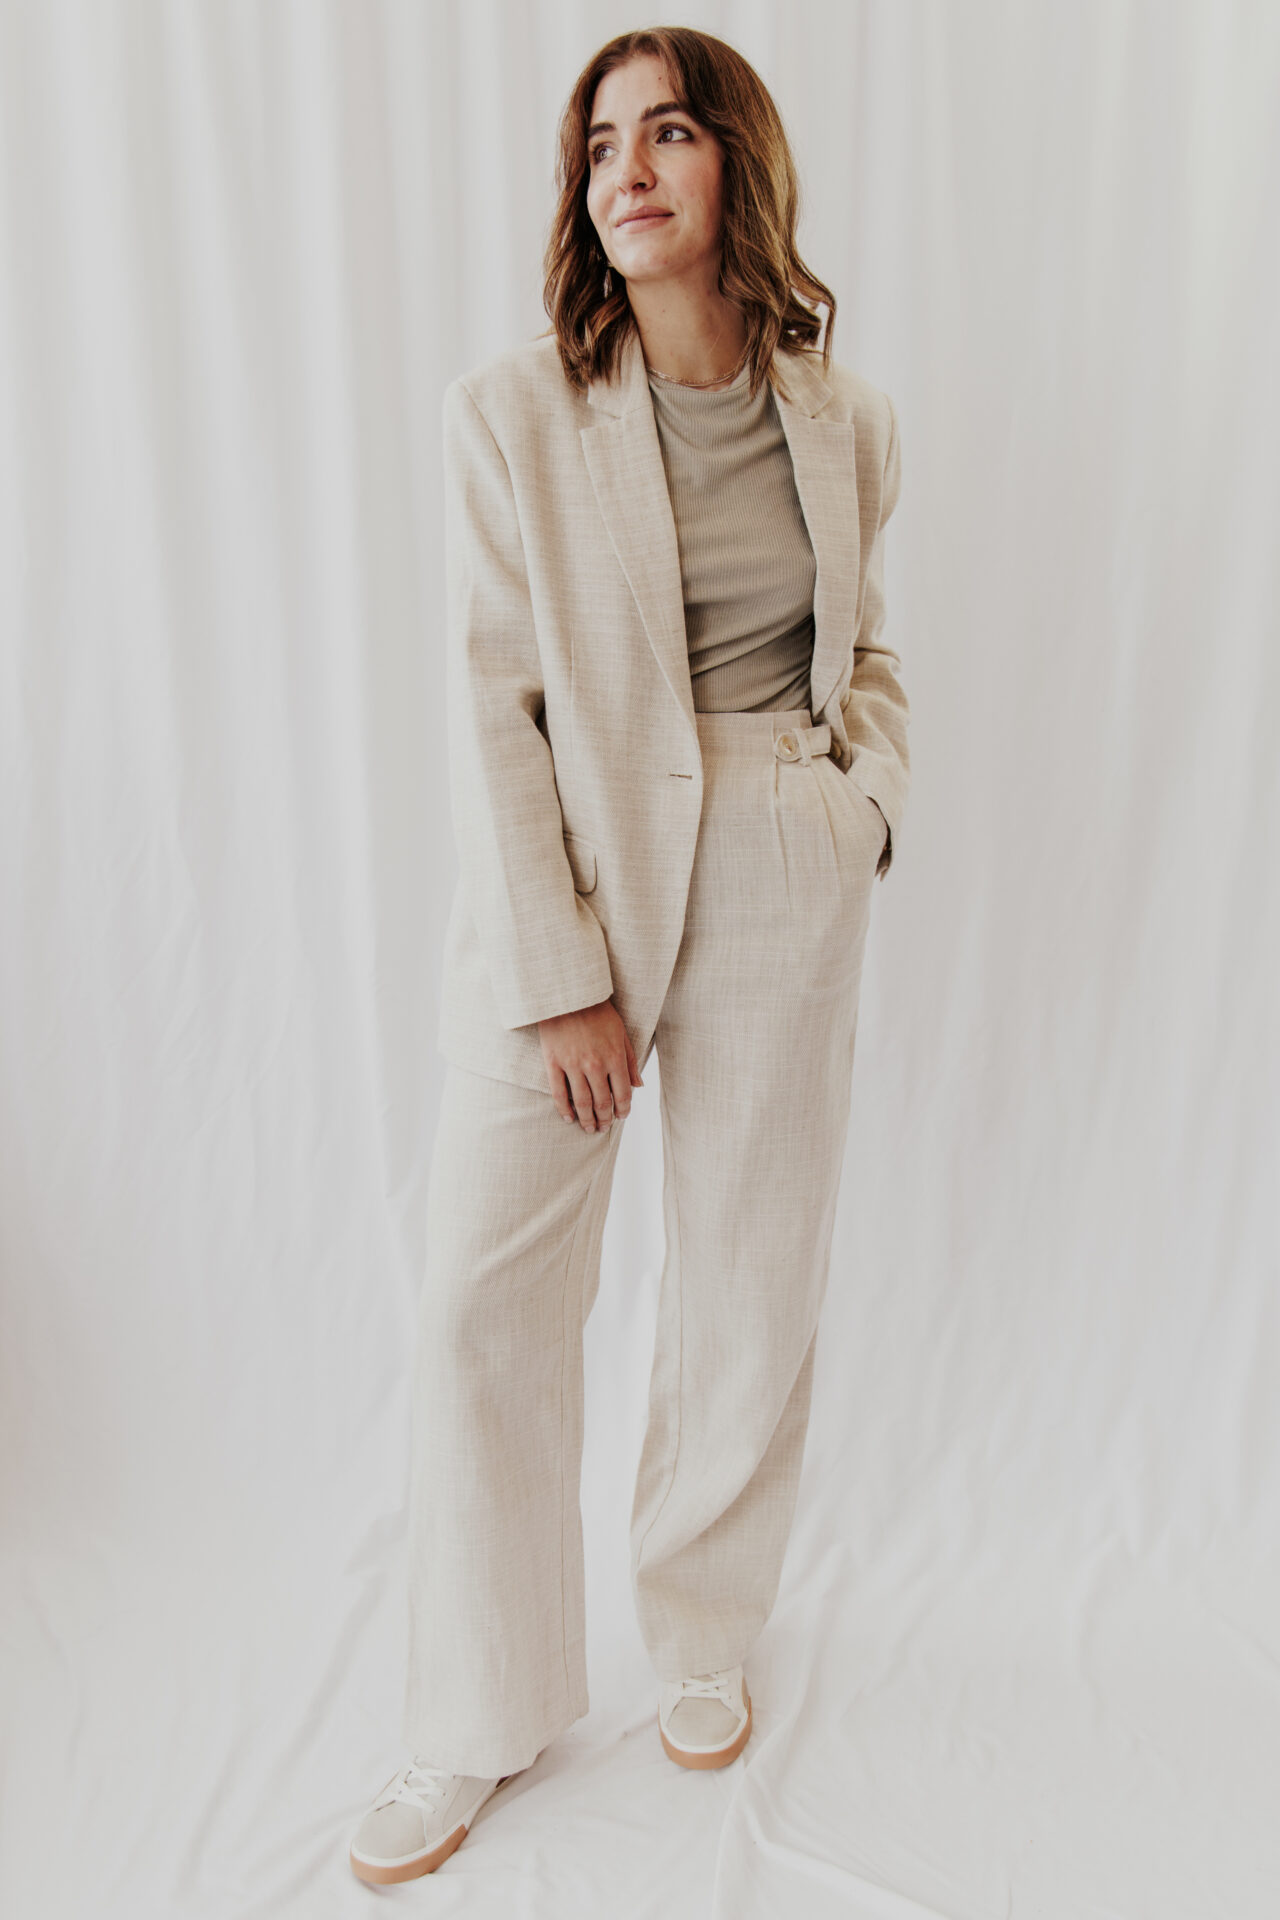 Model wearing blazer and trousers.